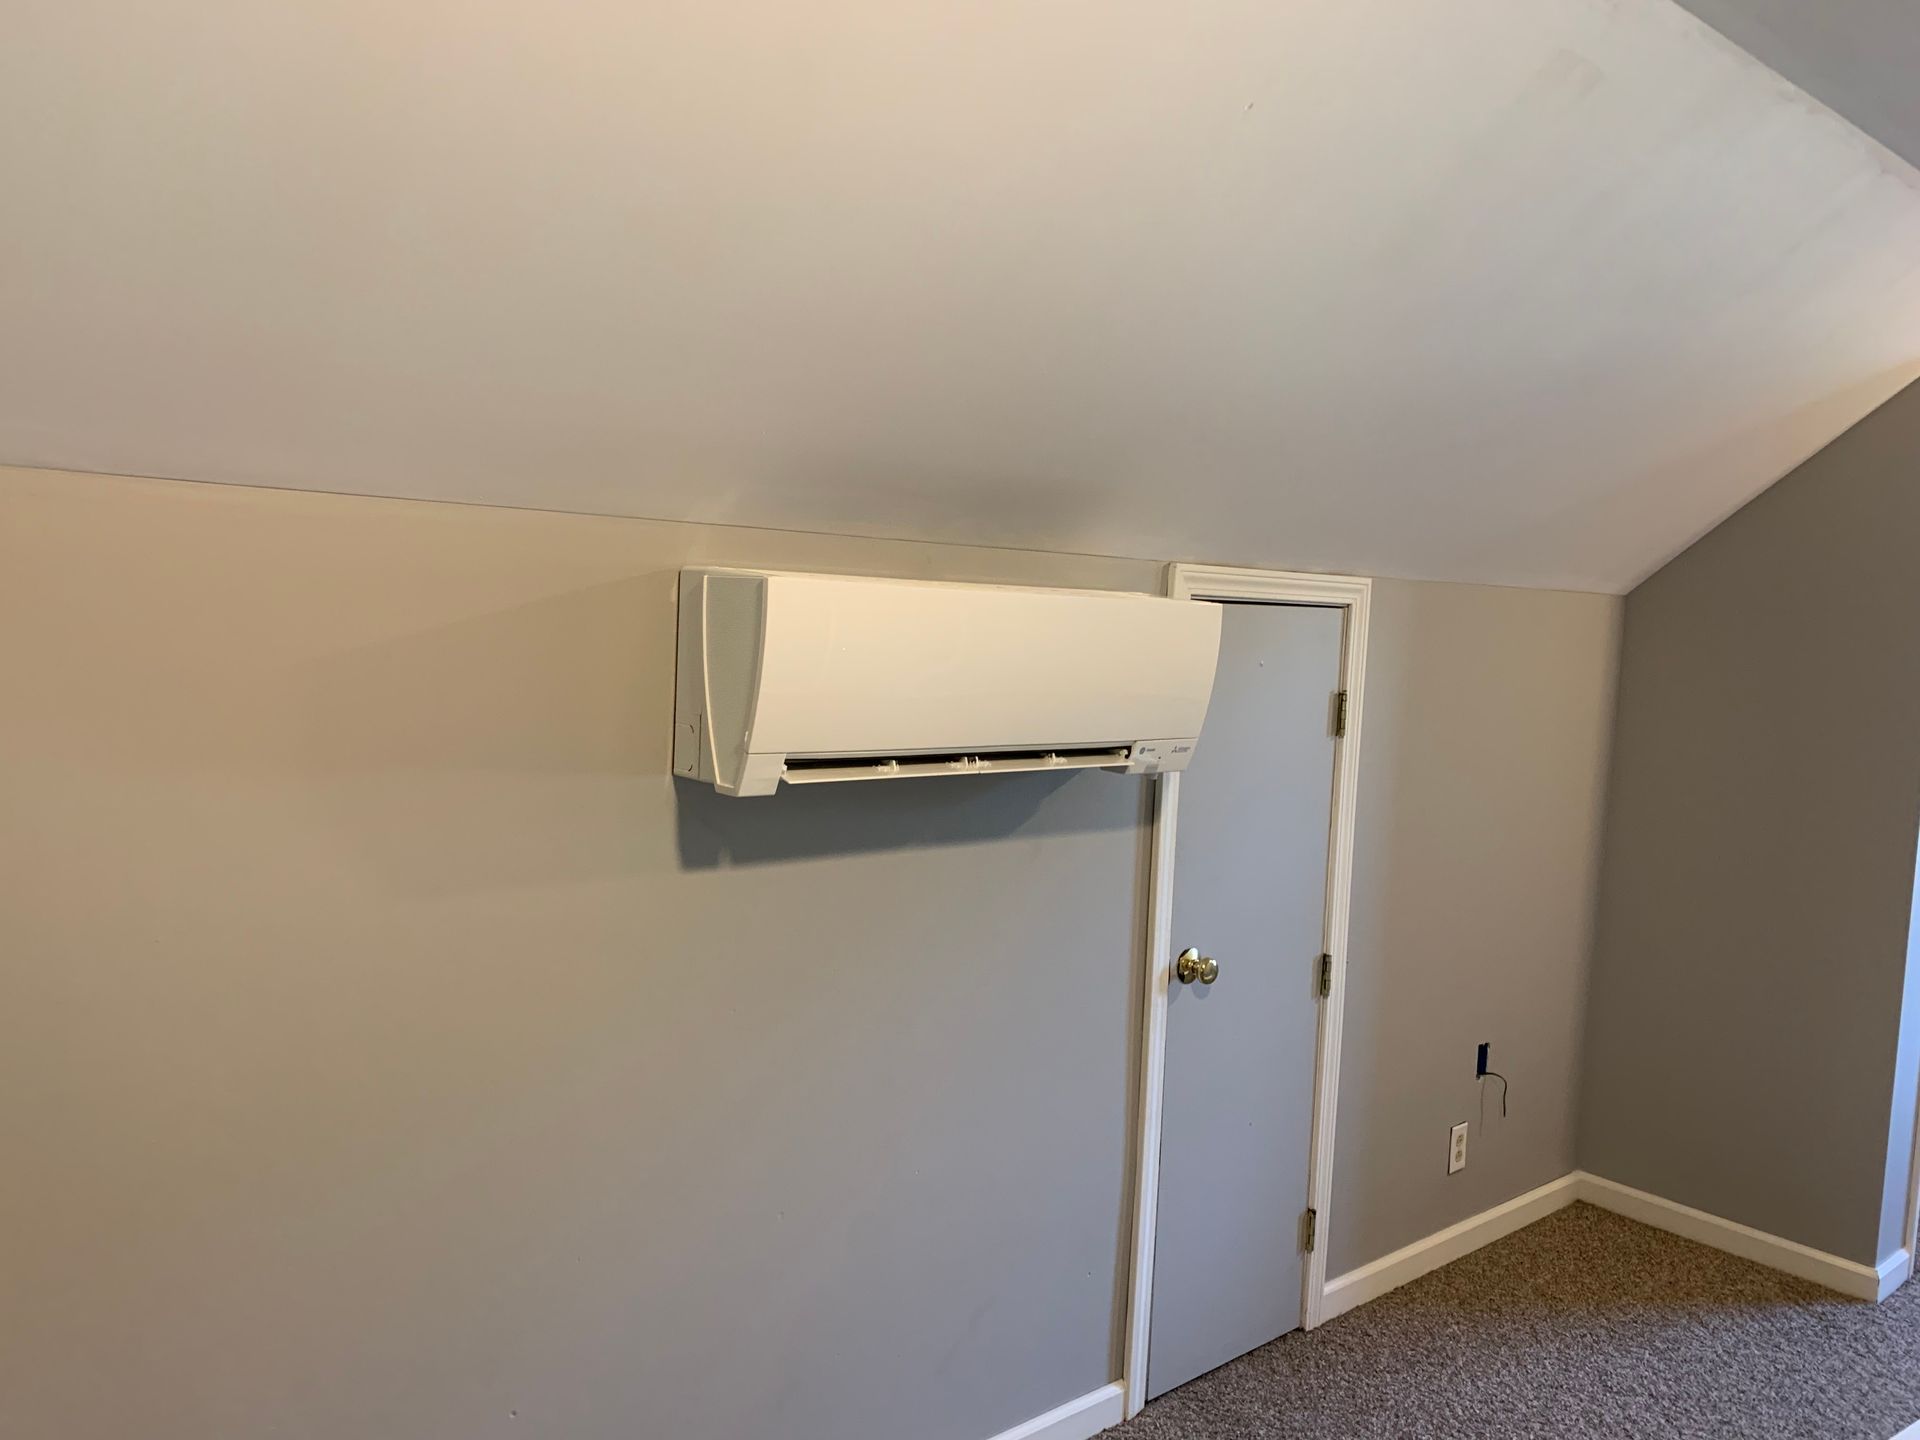 A room with a door and a wall mounted air conditioner.